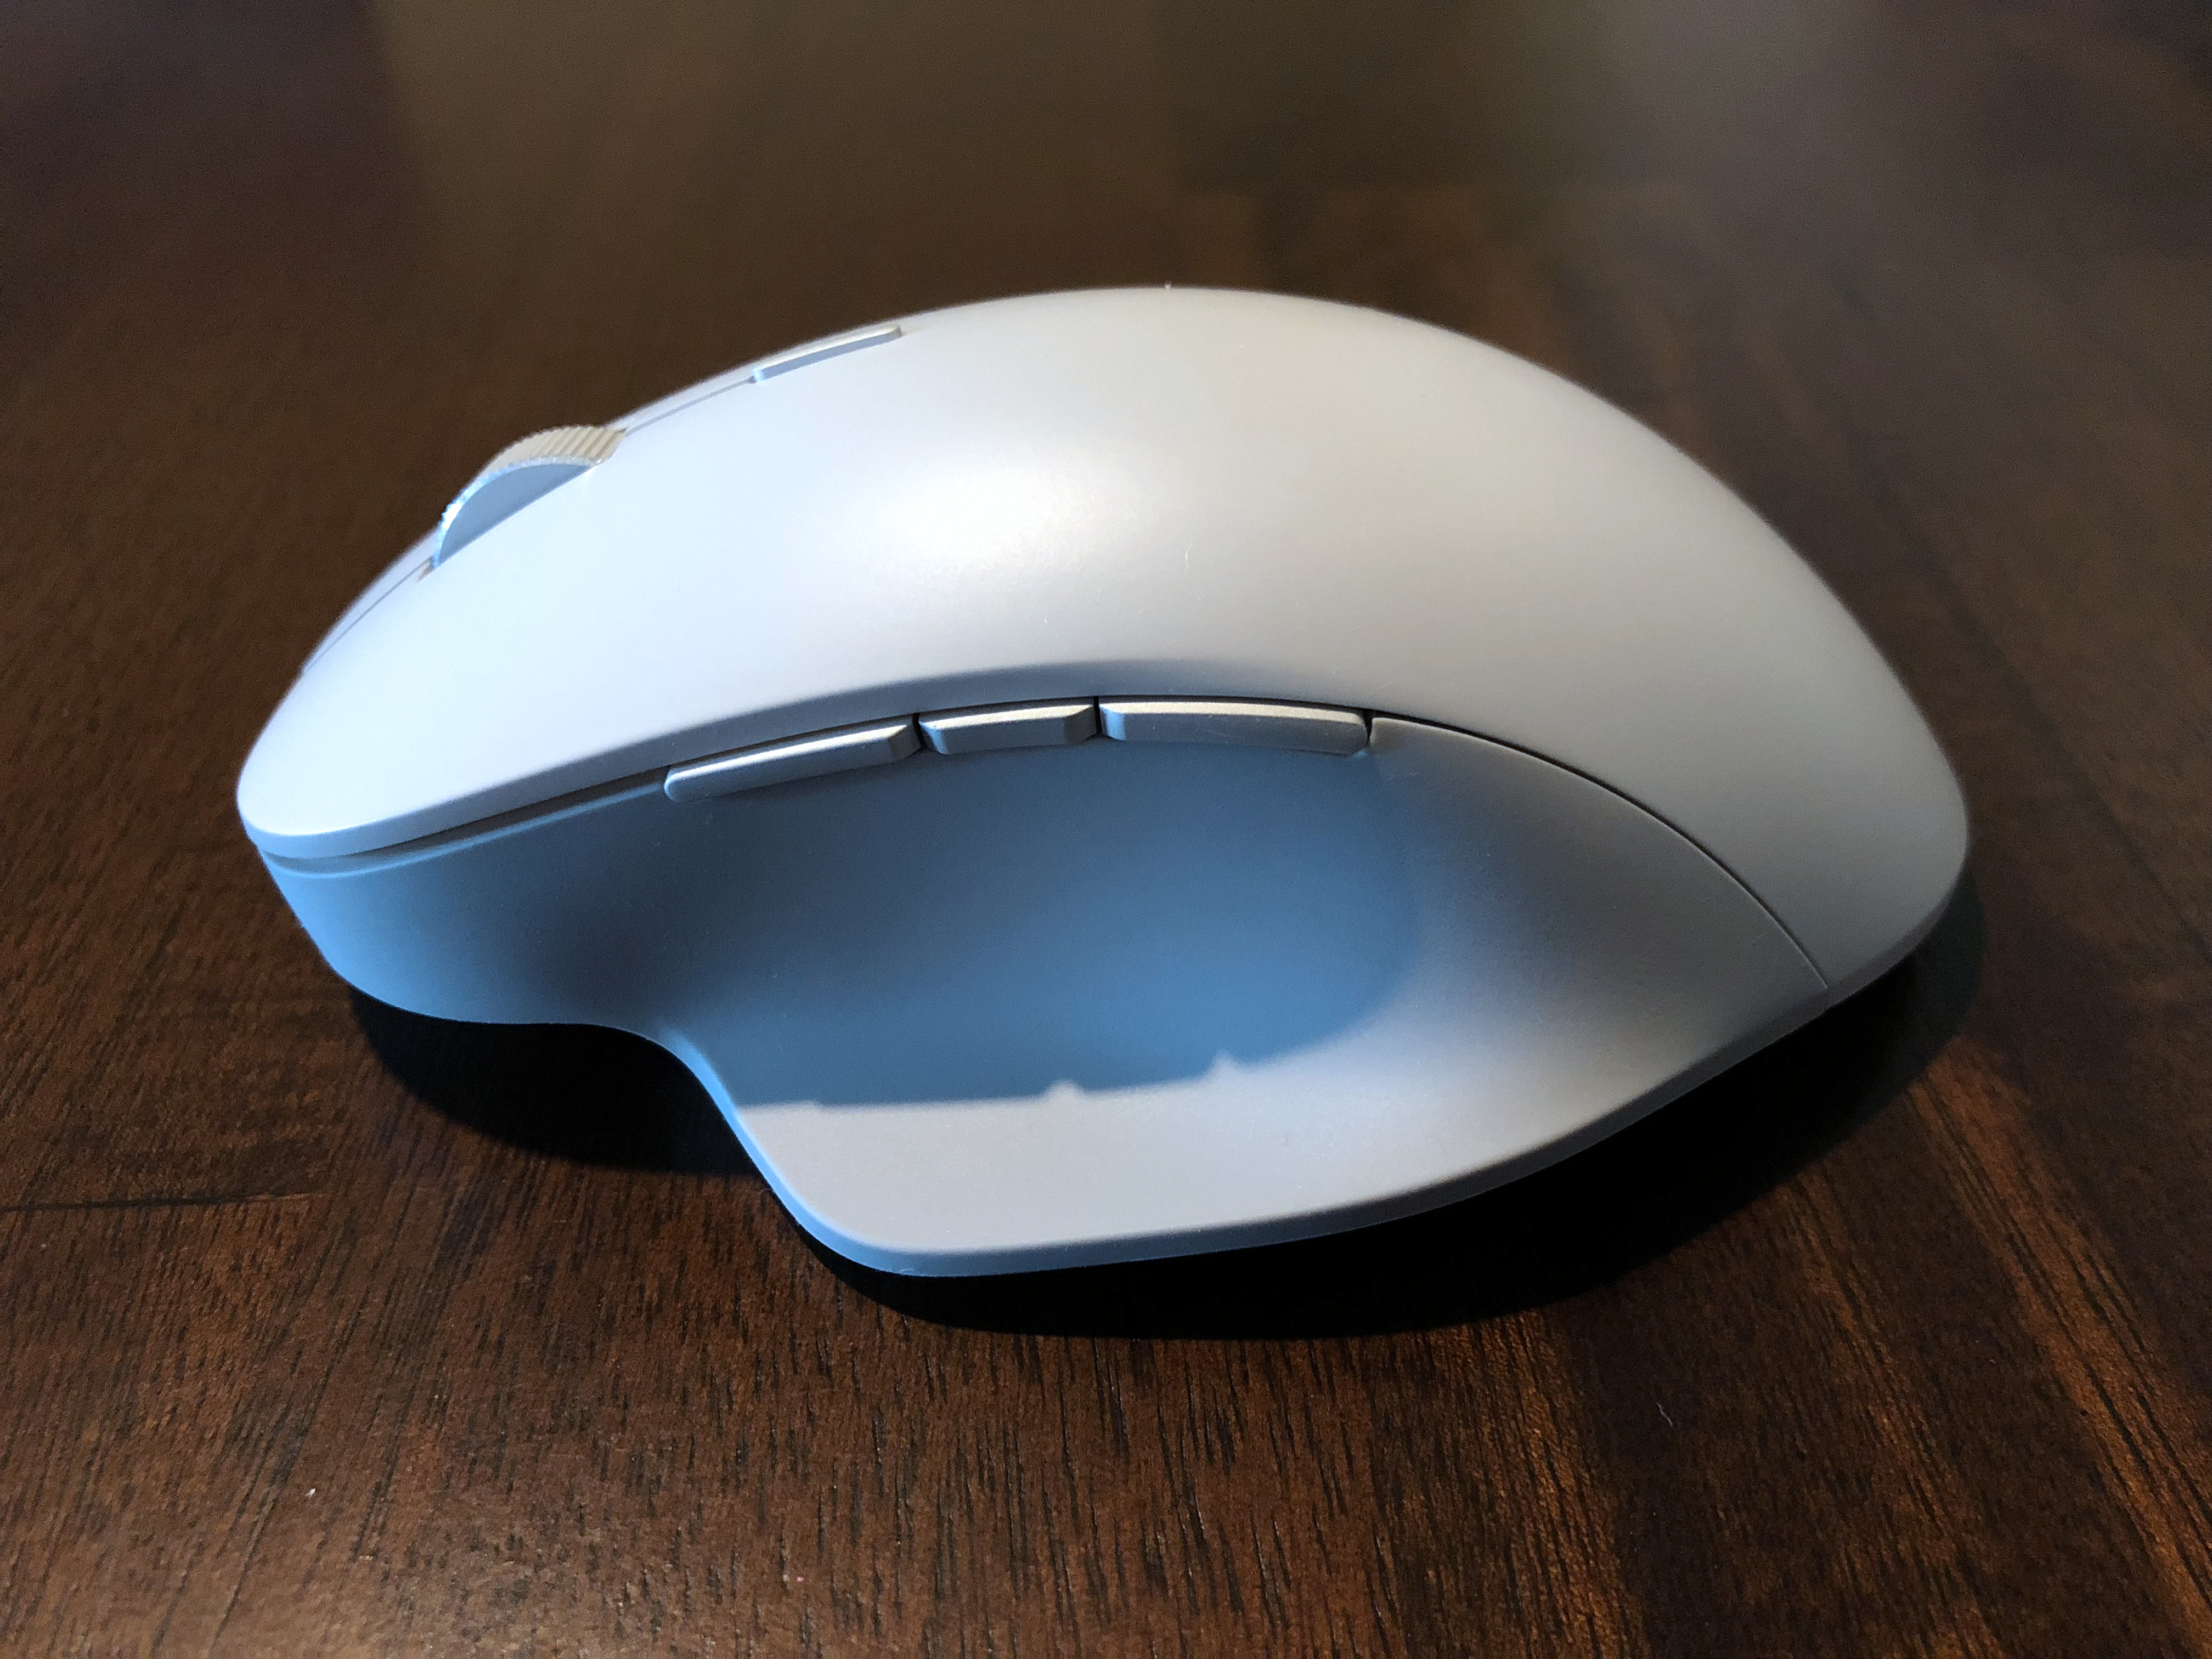 mac mouse driver for pc